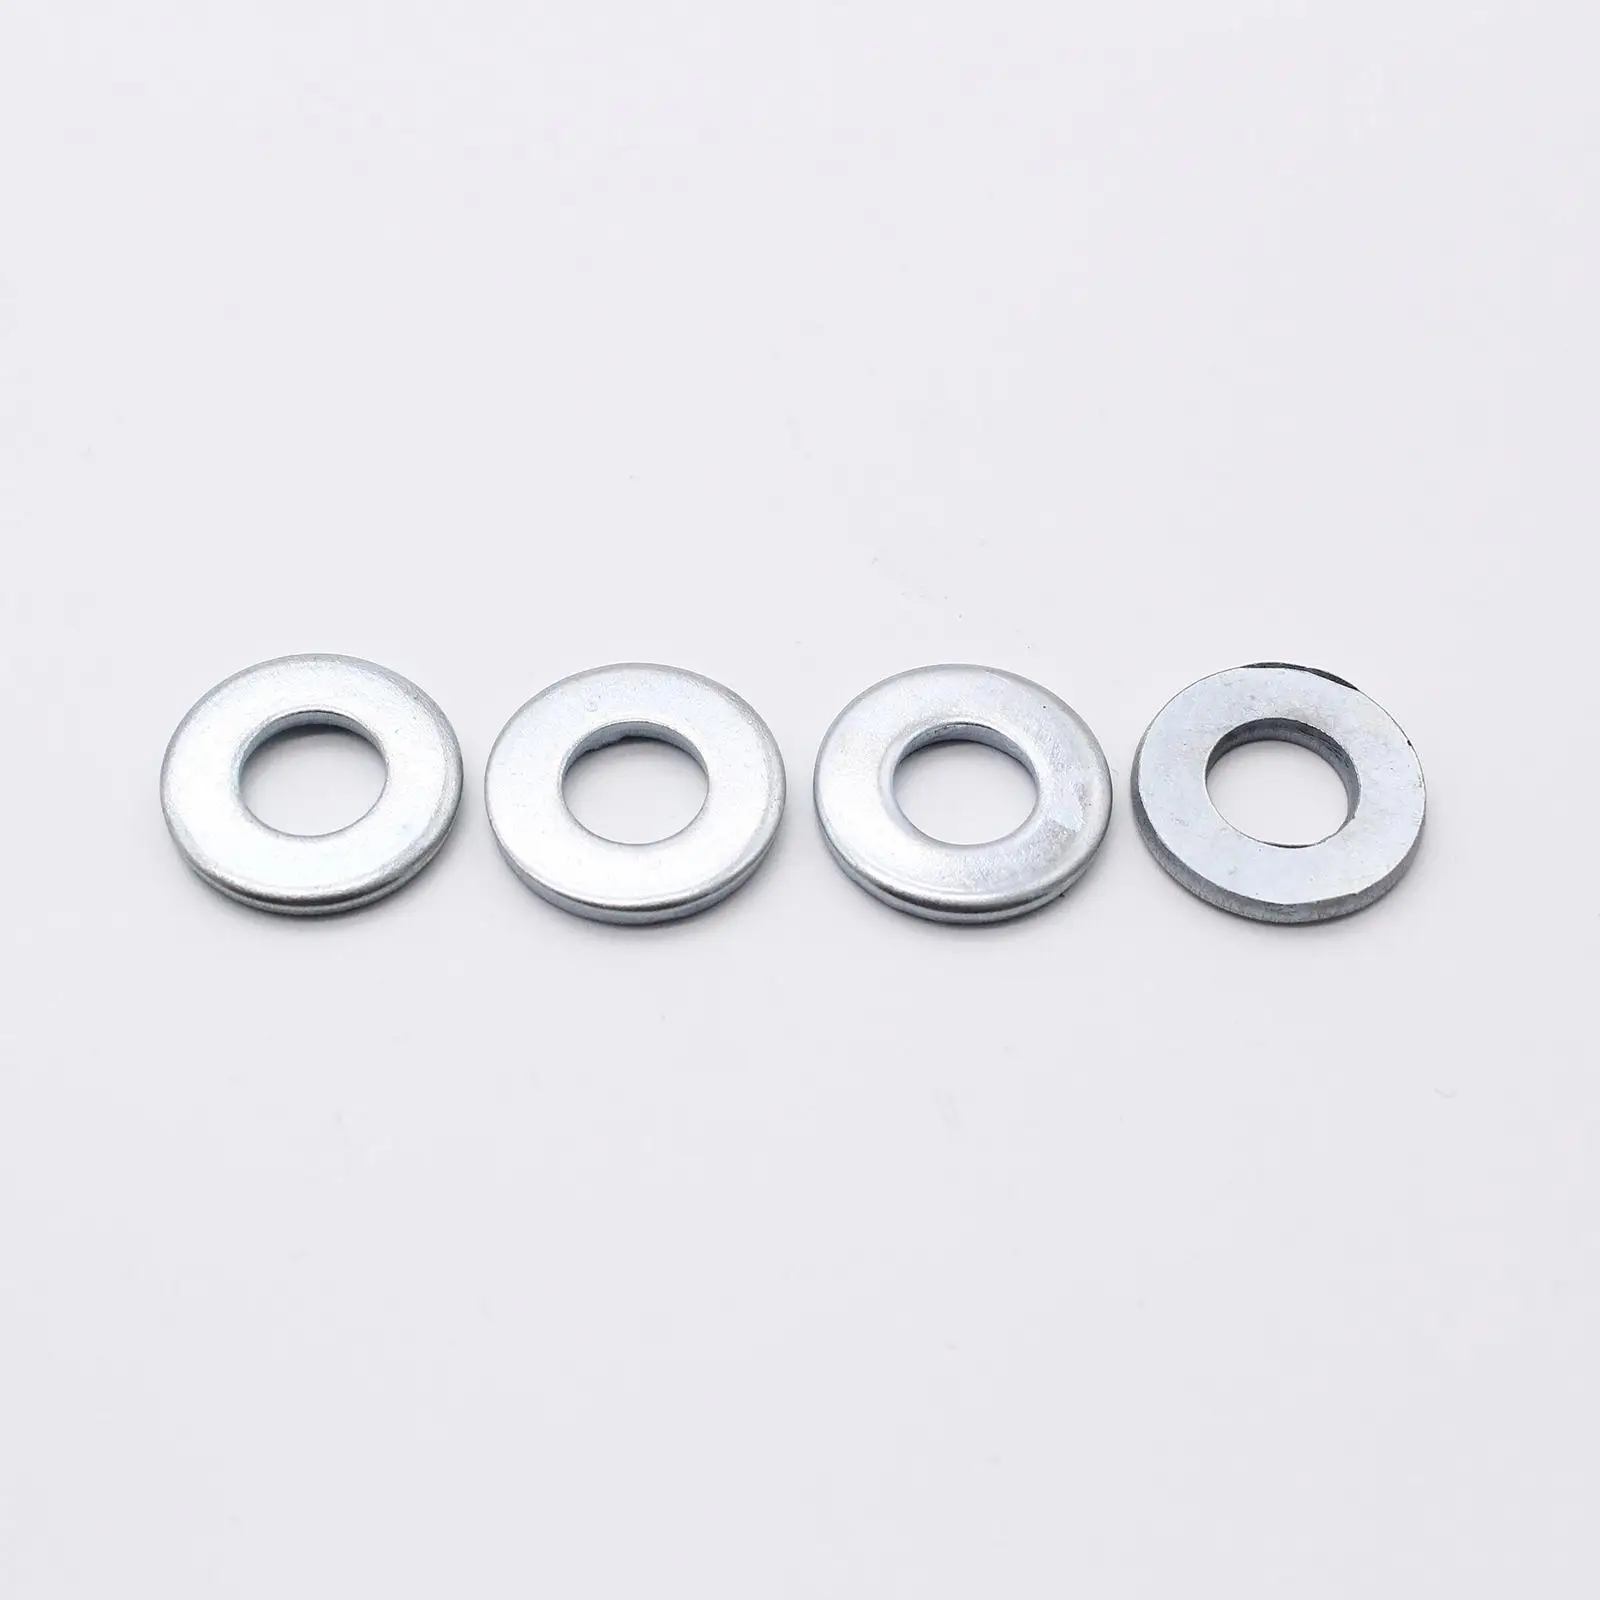 Car Carb Stud Accessories 4 Studs 4 Washer Fit for